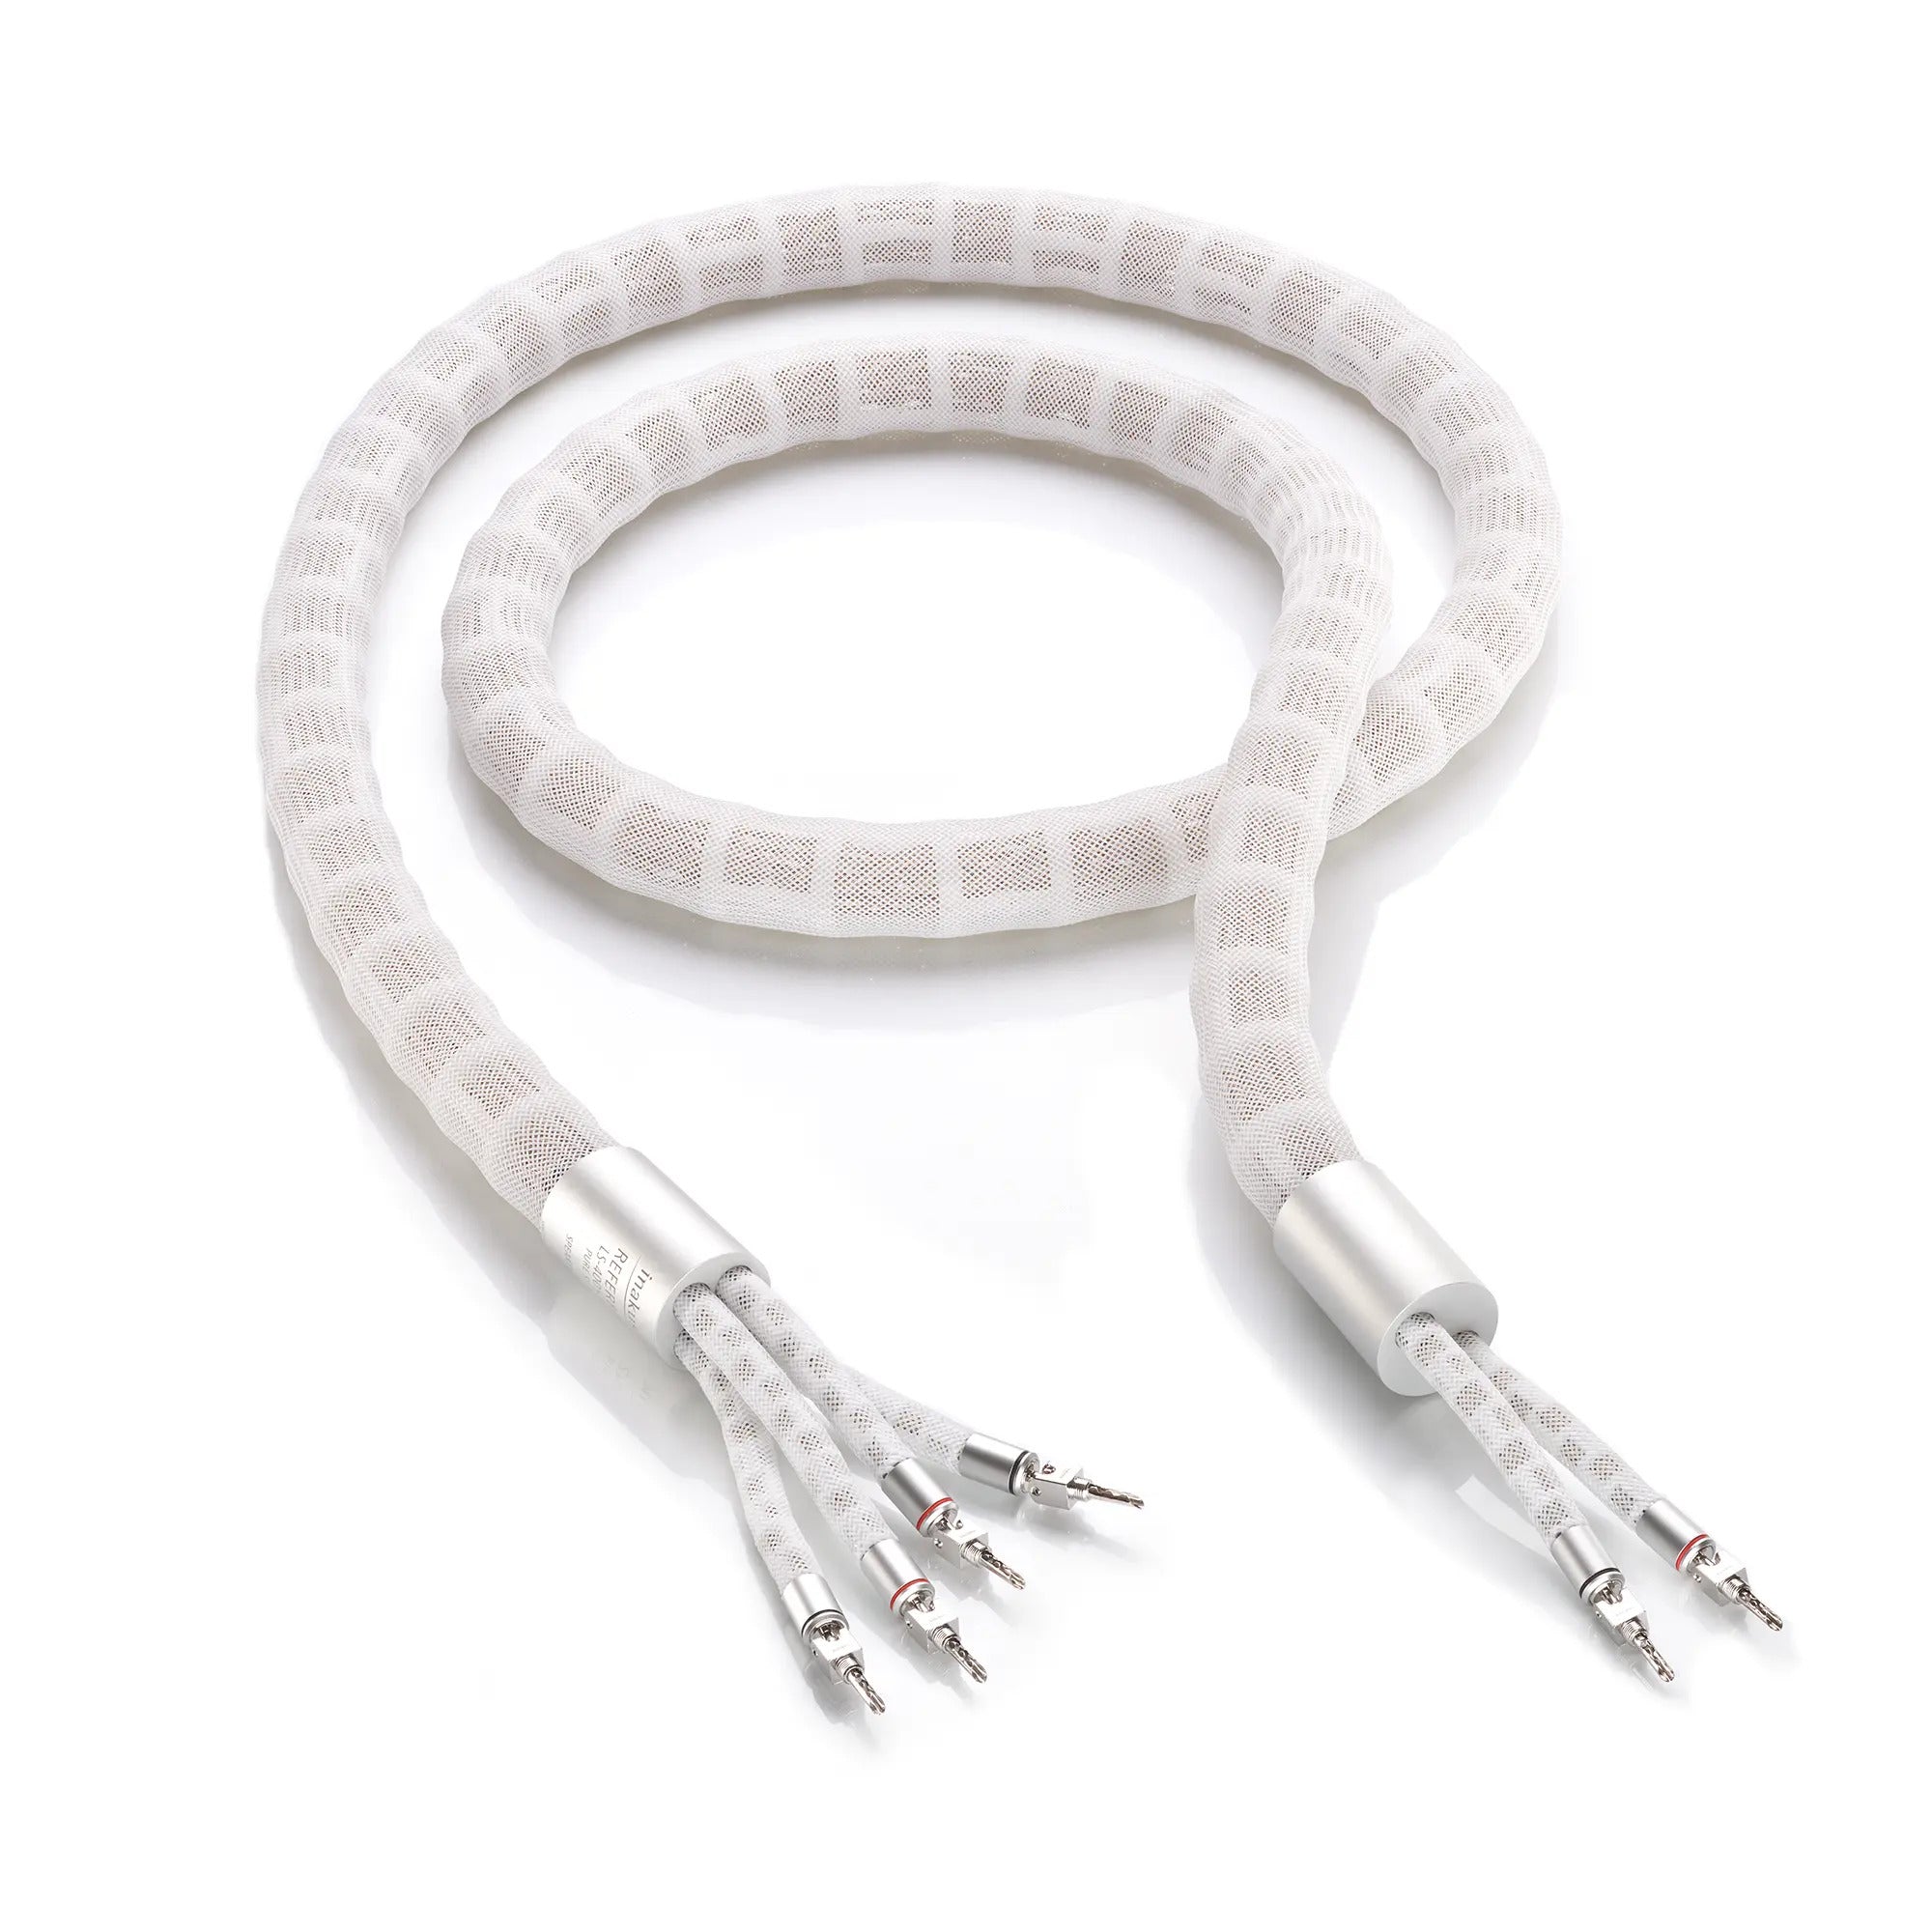 Inakustik Referenz LS-4005 AIR Pure Silver Speaker Cable (pair)